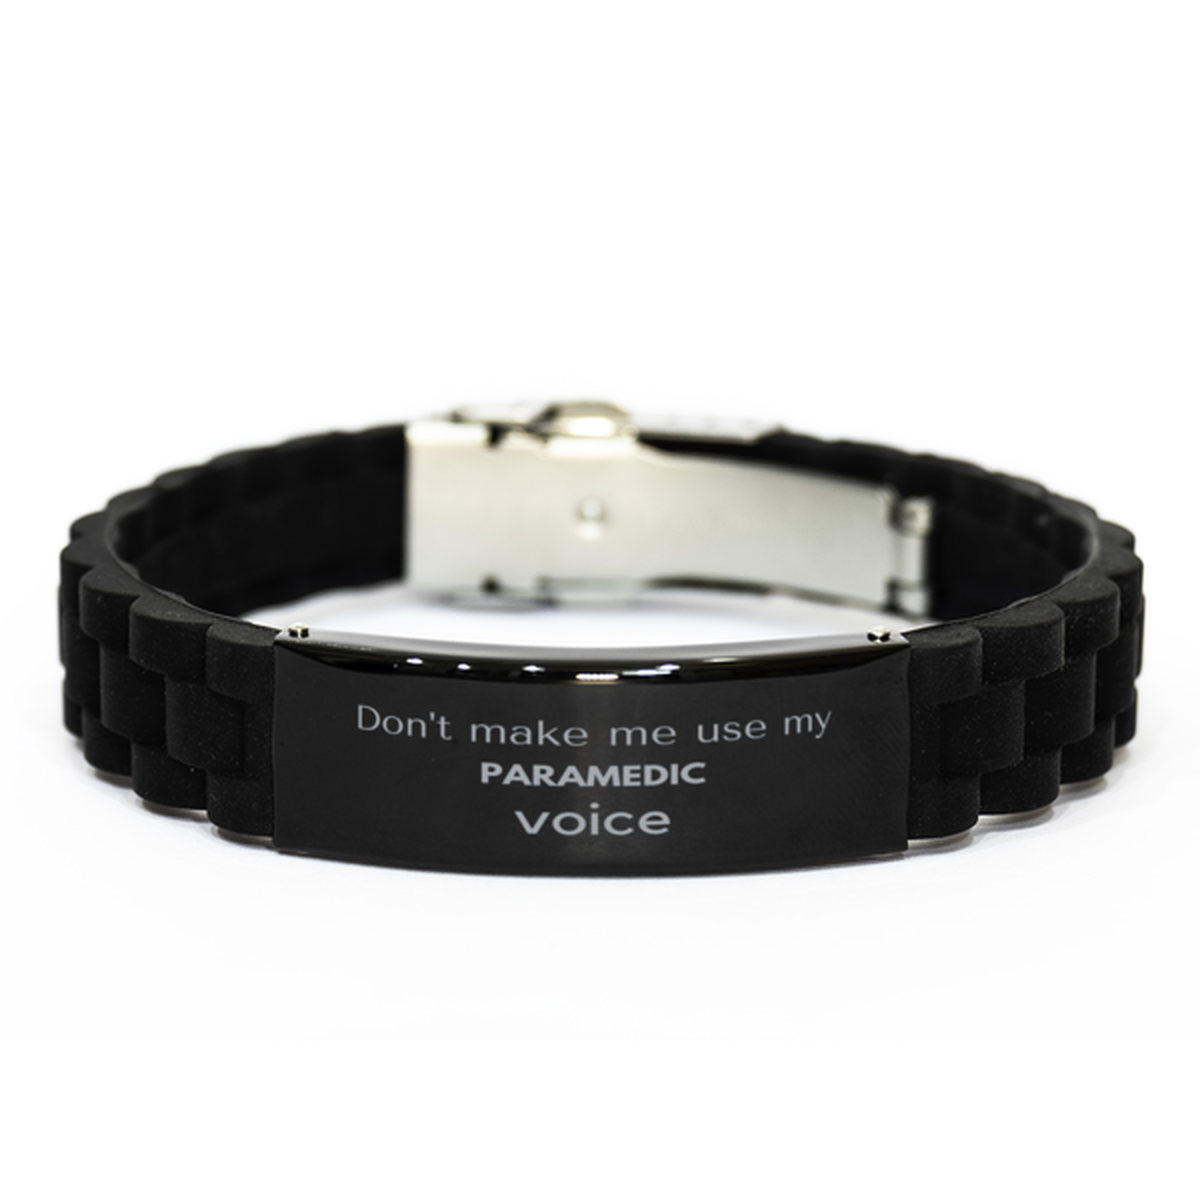 Don't make me use my Paramedic voice, Sarcasm Paramedic Gifts, Christmas Paramedic Black Glidelock Clasp Bracelet Birthday Unique Gifts For Paramedic Coworkers, Men, Women, Colleague, Friends